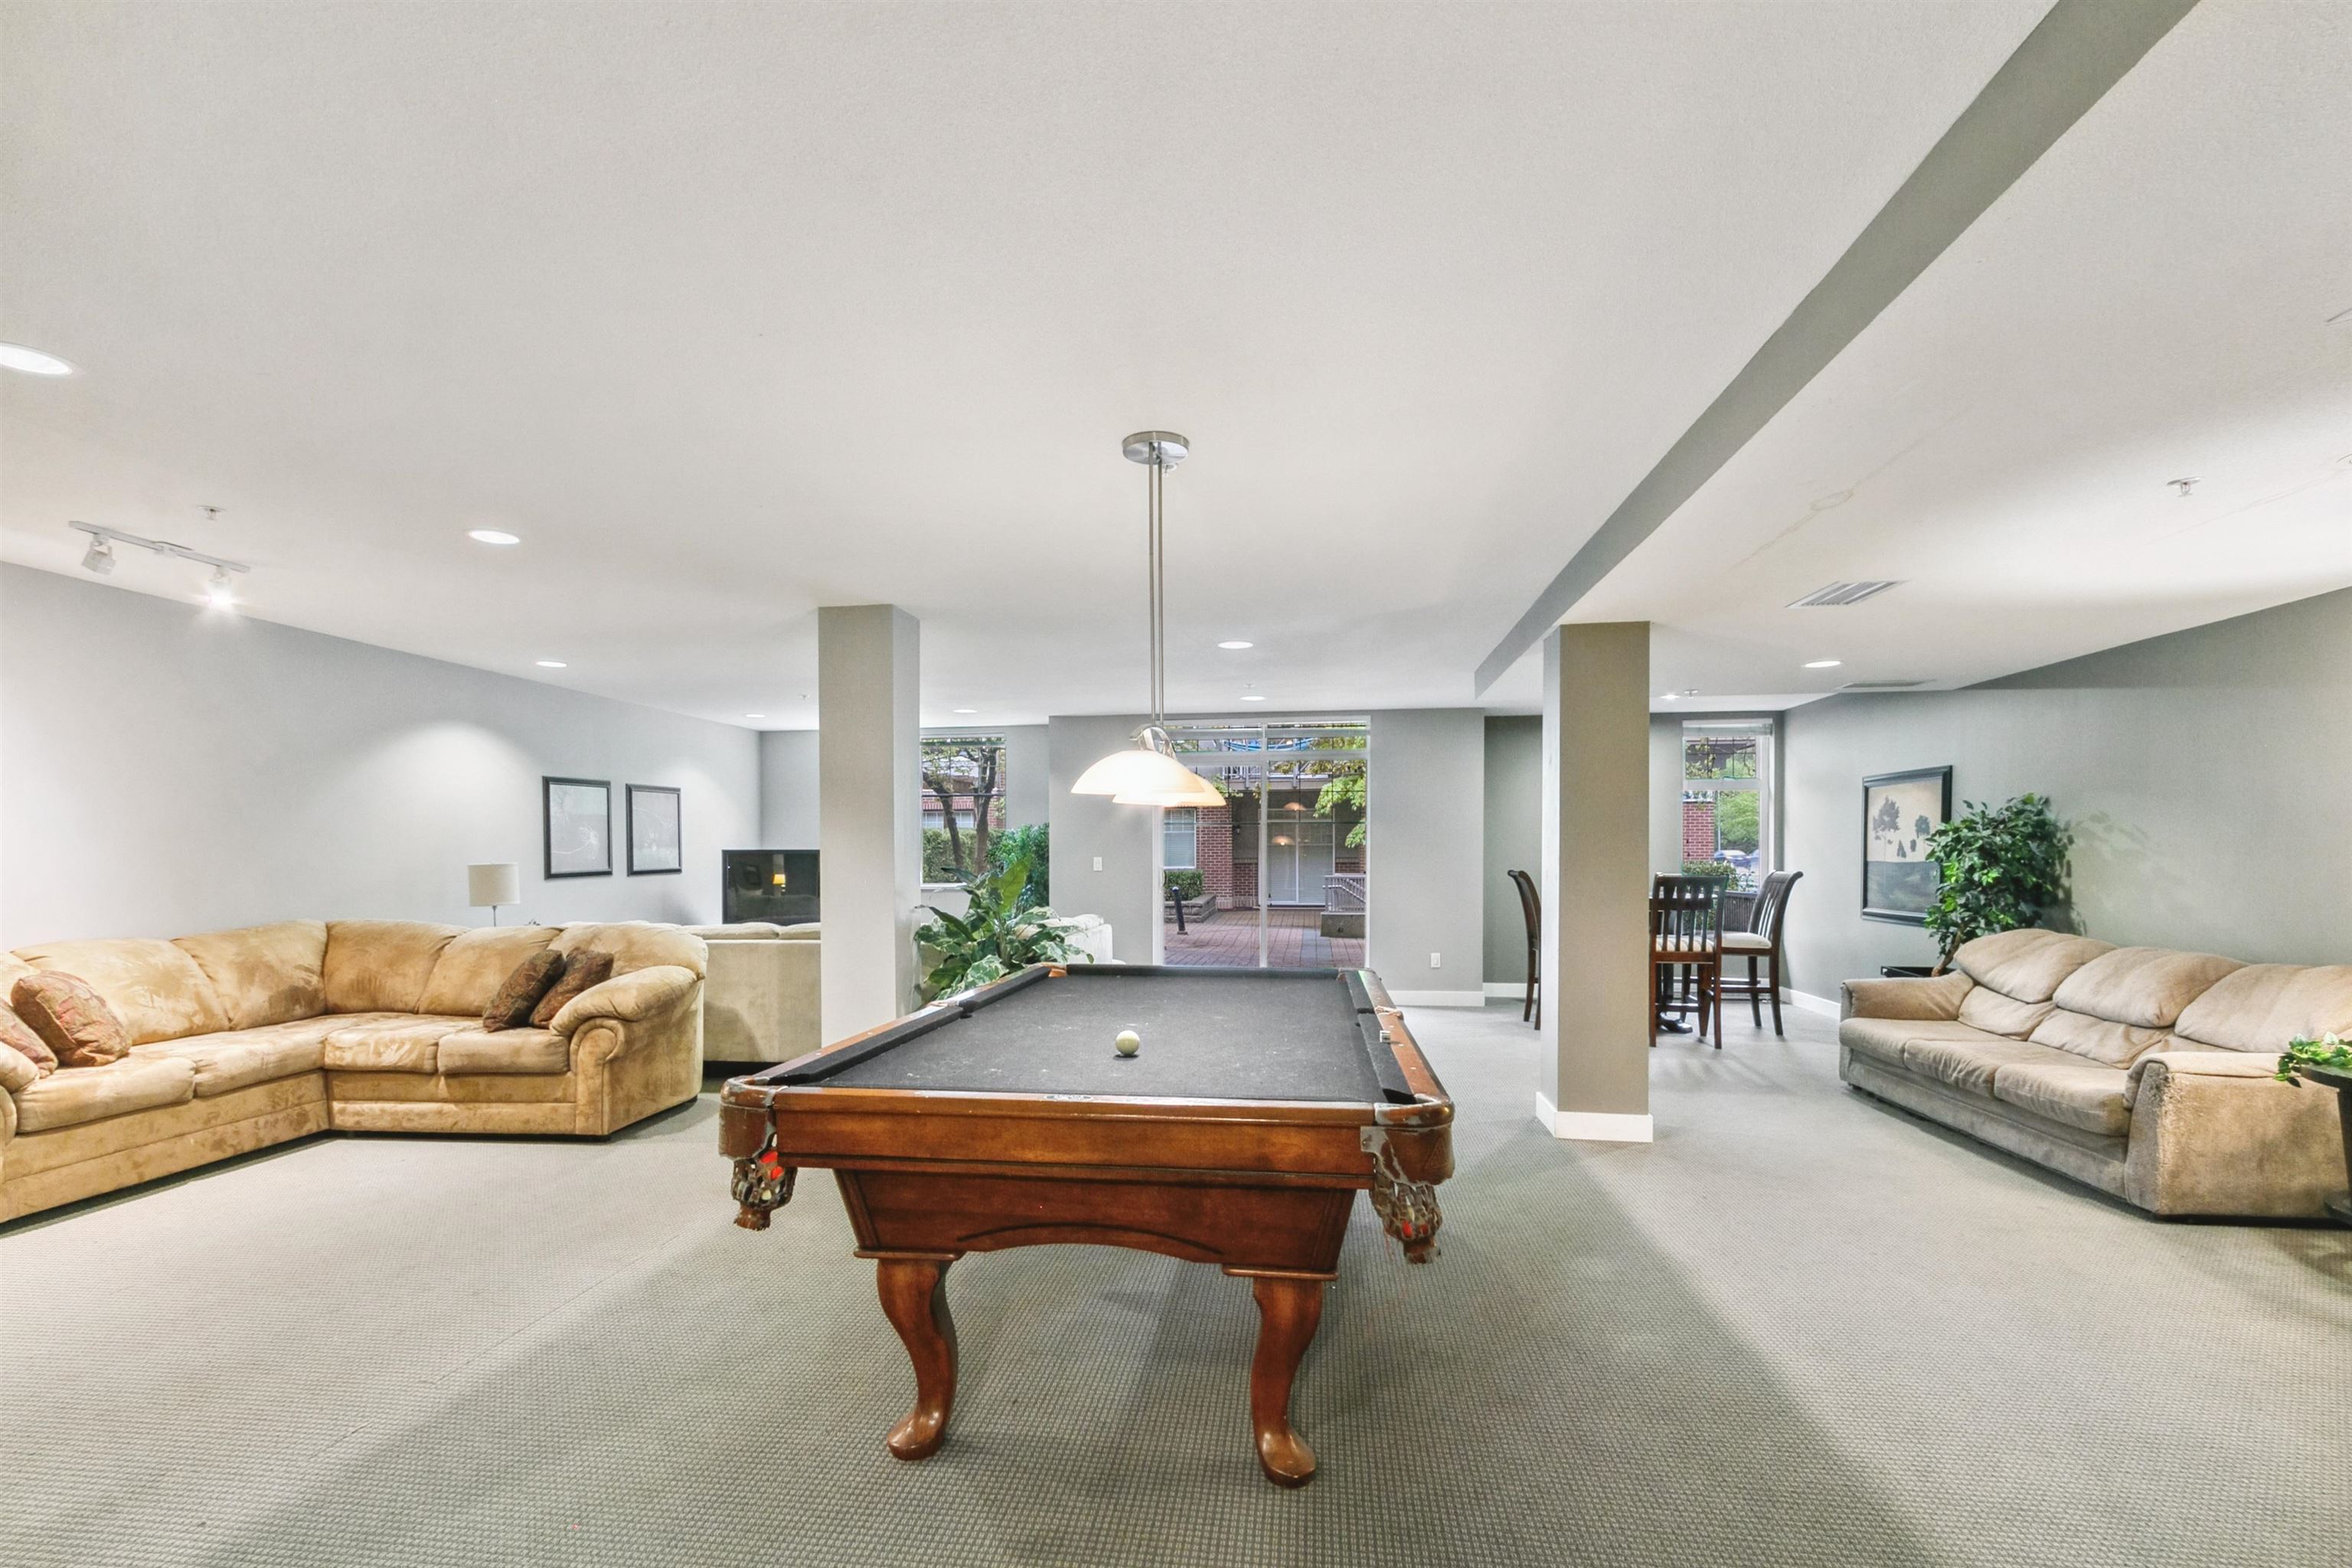 Amenity room with billiards and TV